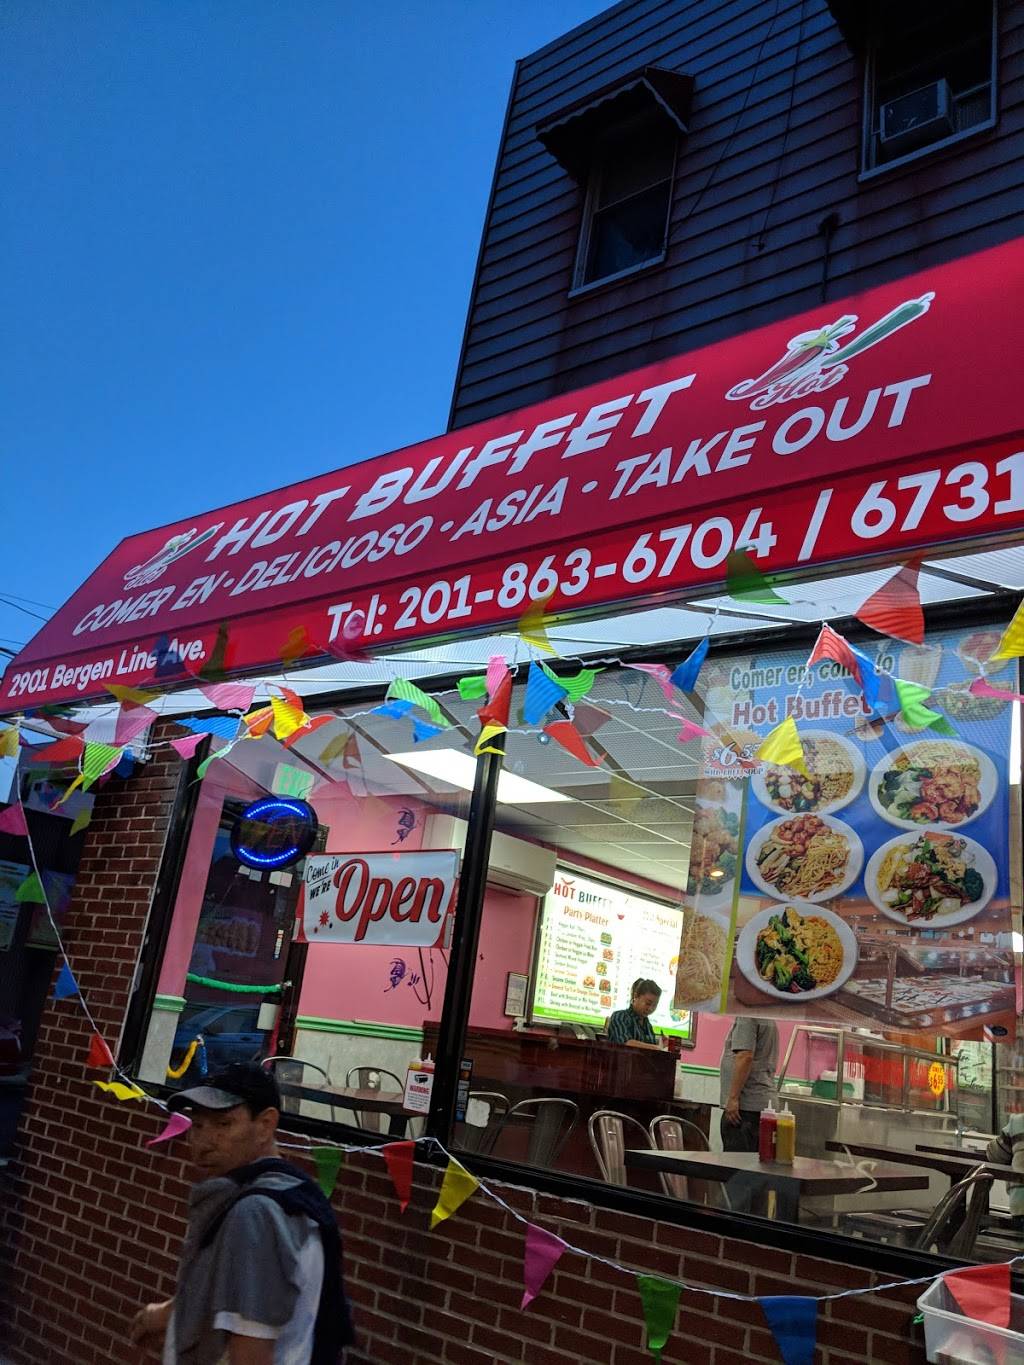 Hot Buffet -All you can eat & Buffet take out | restaurant | 2901 Bergenline Ave, Union City, NJ 07087, USA | 2018636704 OR +1 201-863-6704